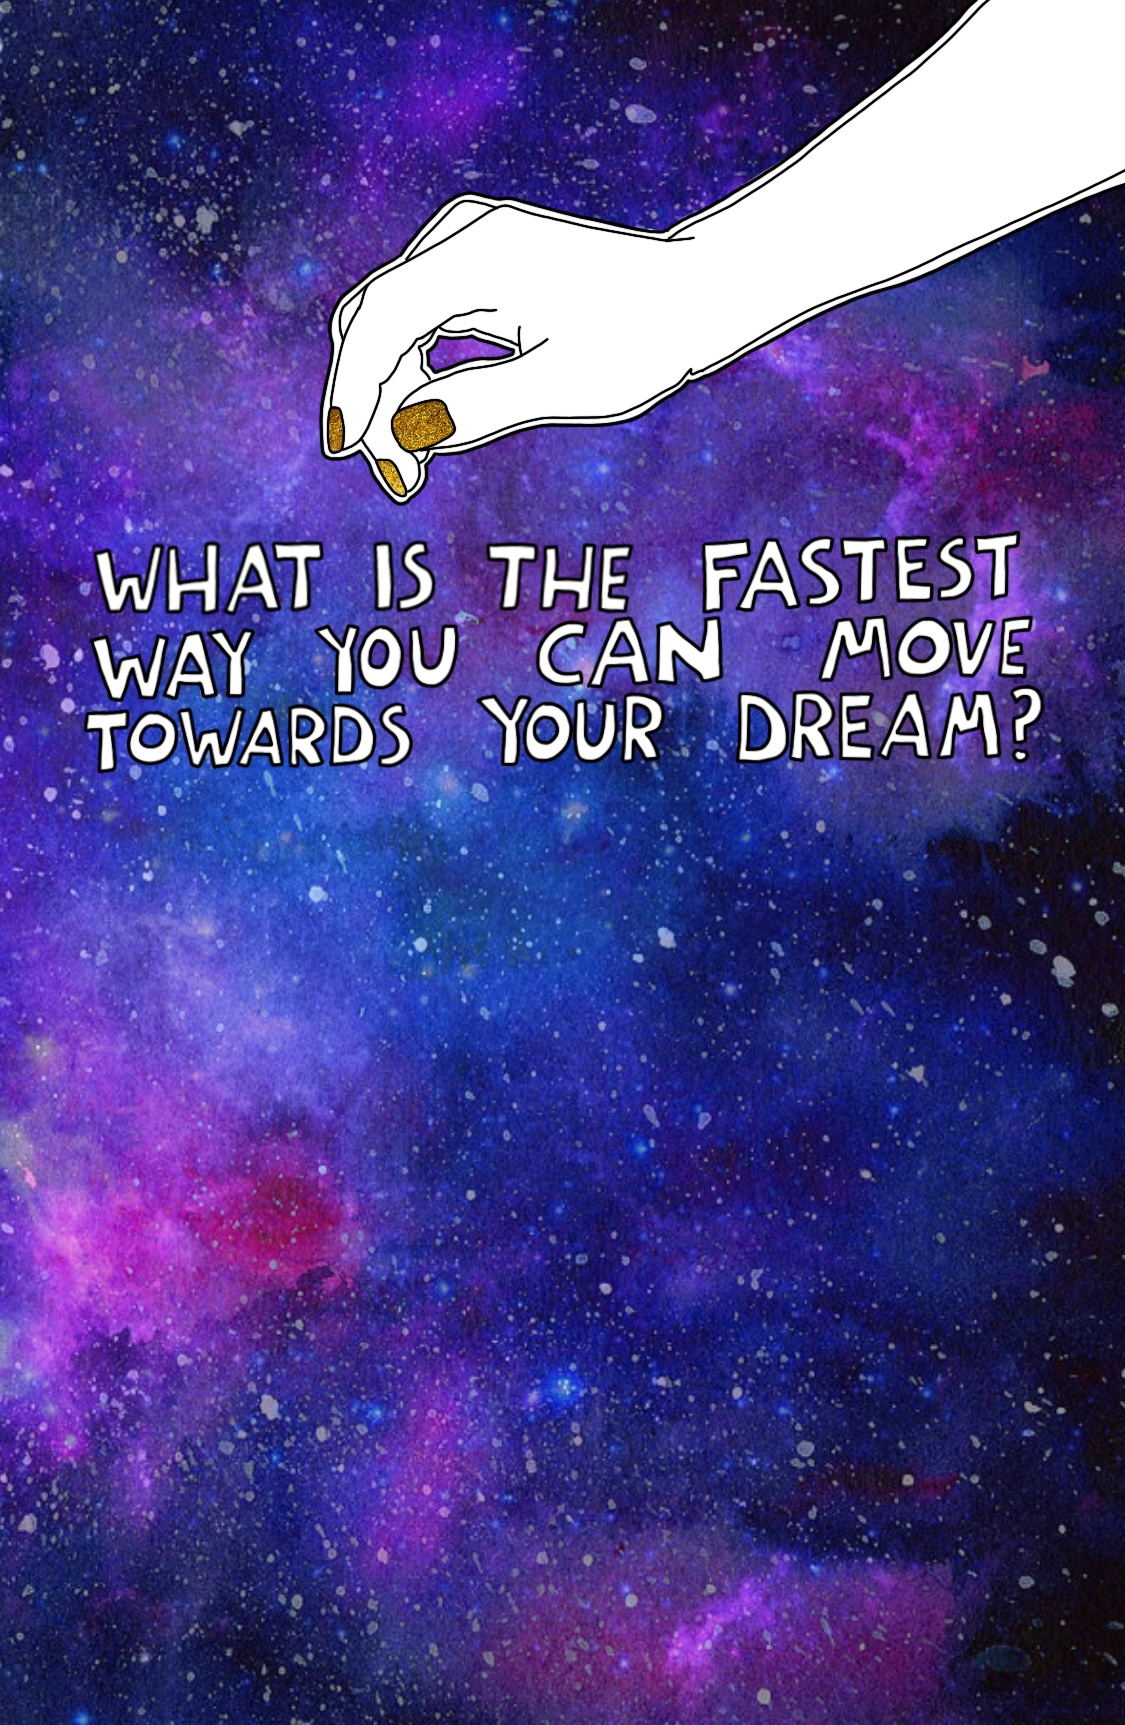 Journal Prompt: What is the fastest way you can move towards your dream?